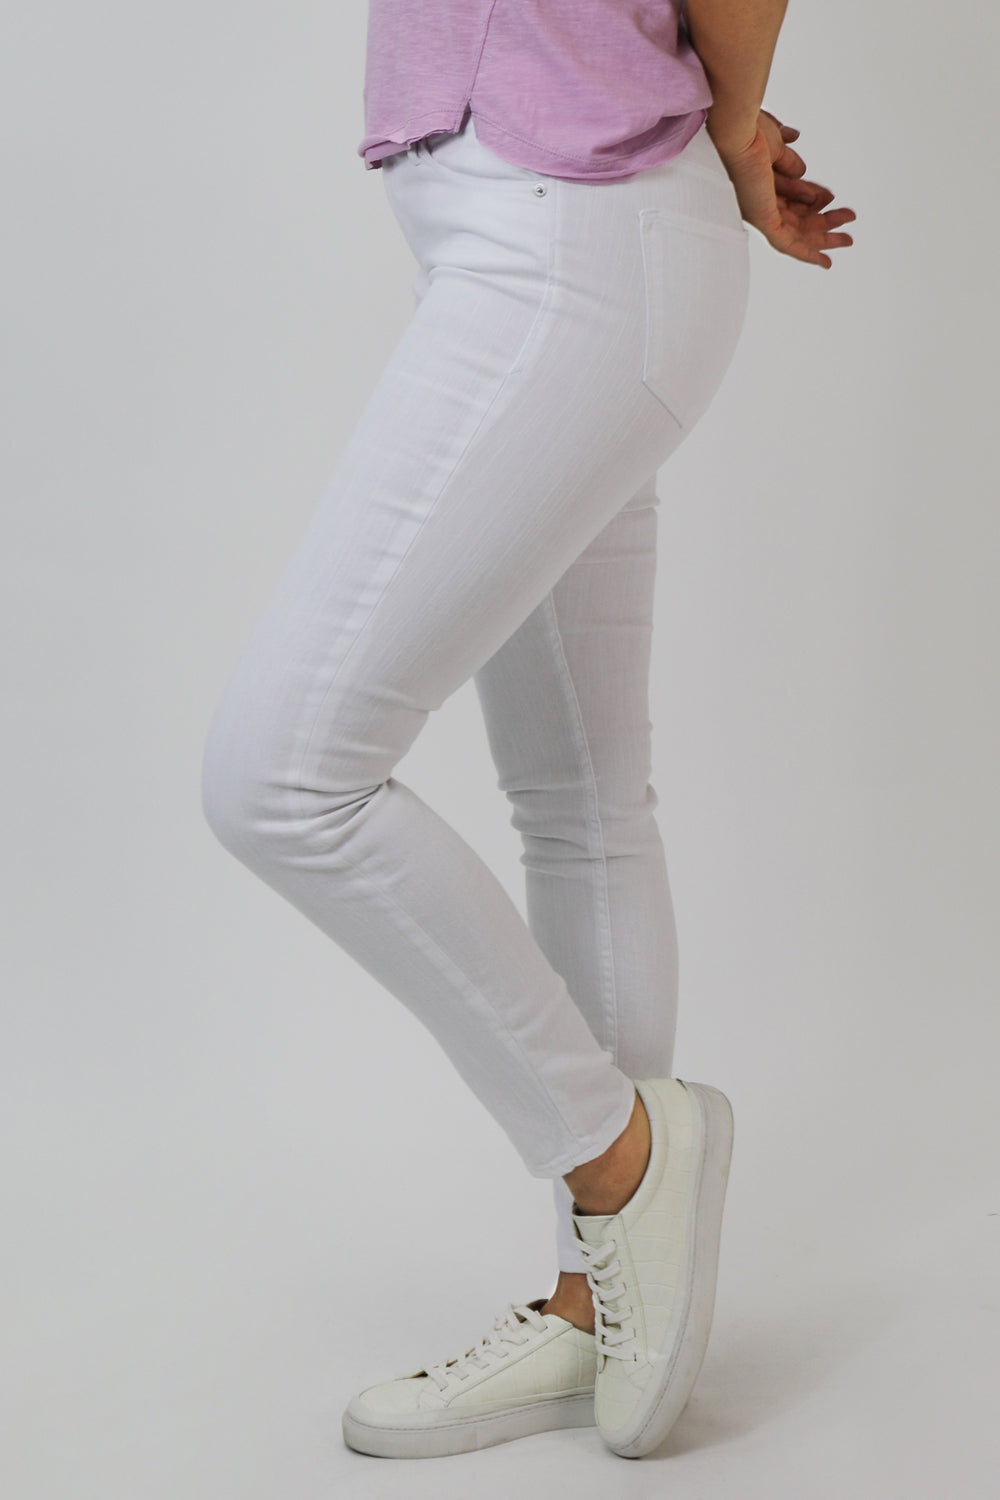 image of a female model wearing a BLAIRE HIGH RISE ANKLE SLIM STRAIGHT JEANS OPTIC WHITE JEANS